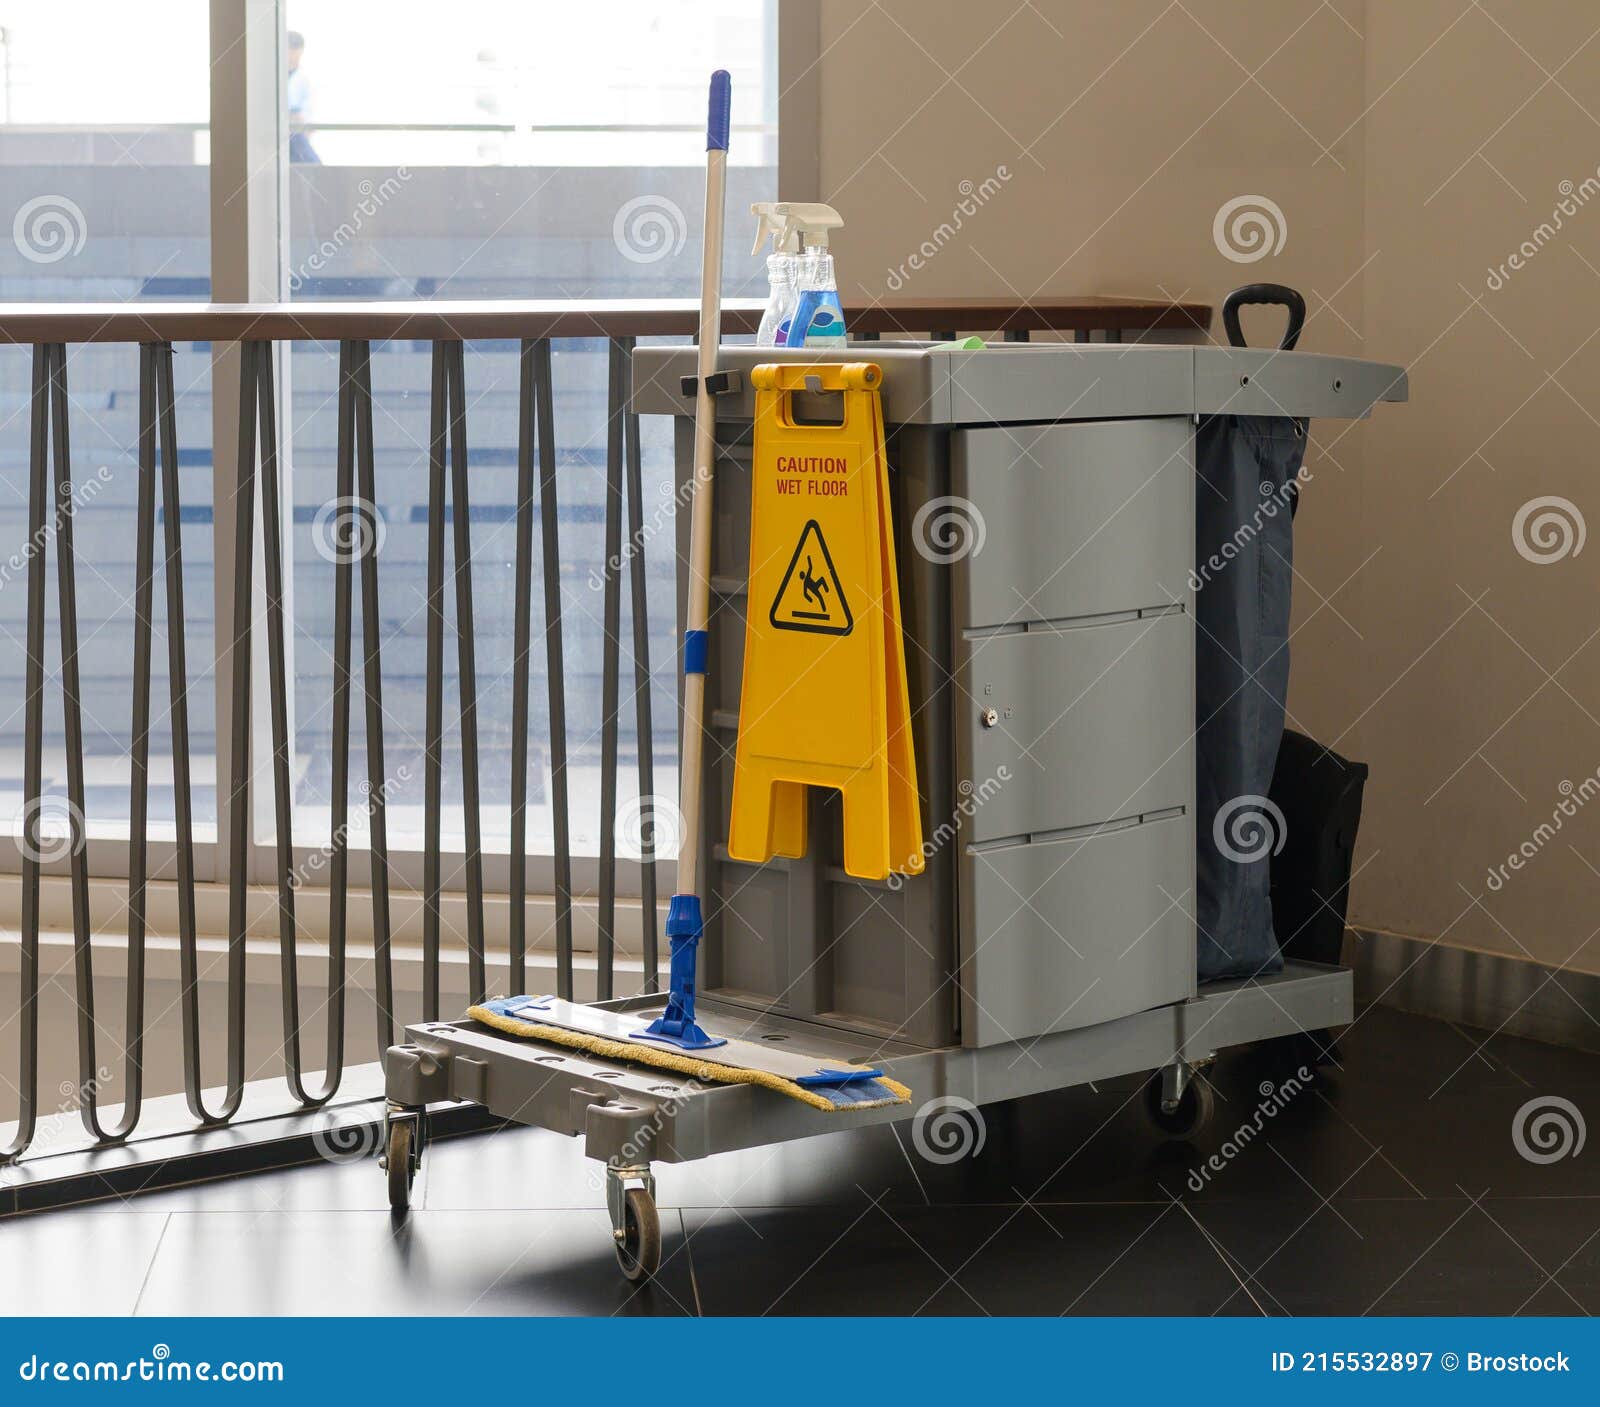 Cleaner Cart in a Public Place. Mobile Cart with Cleaning Products Stock  Image - Image of cleaners, hall: 213255587, Buckets For Cleaning 